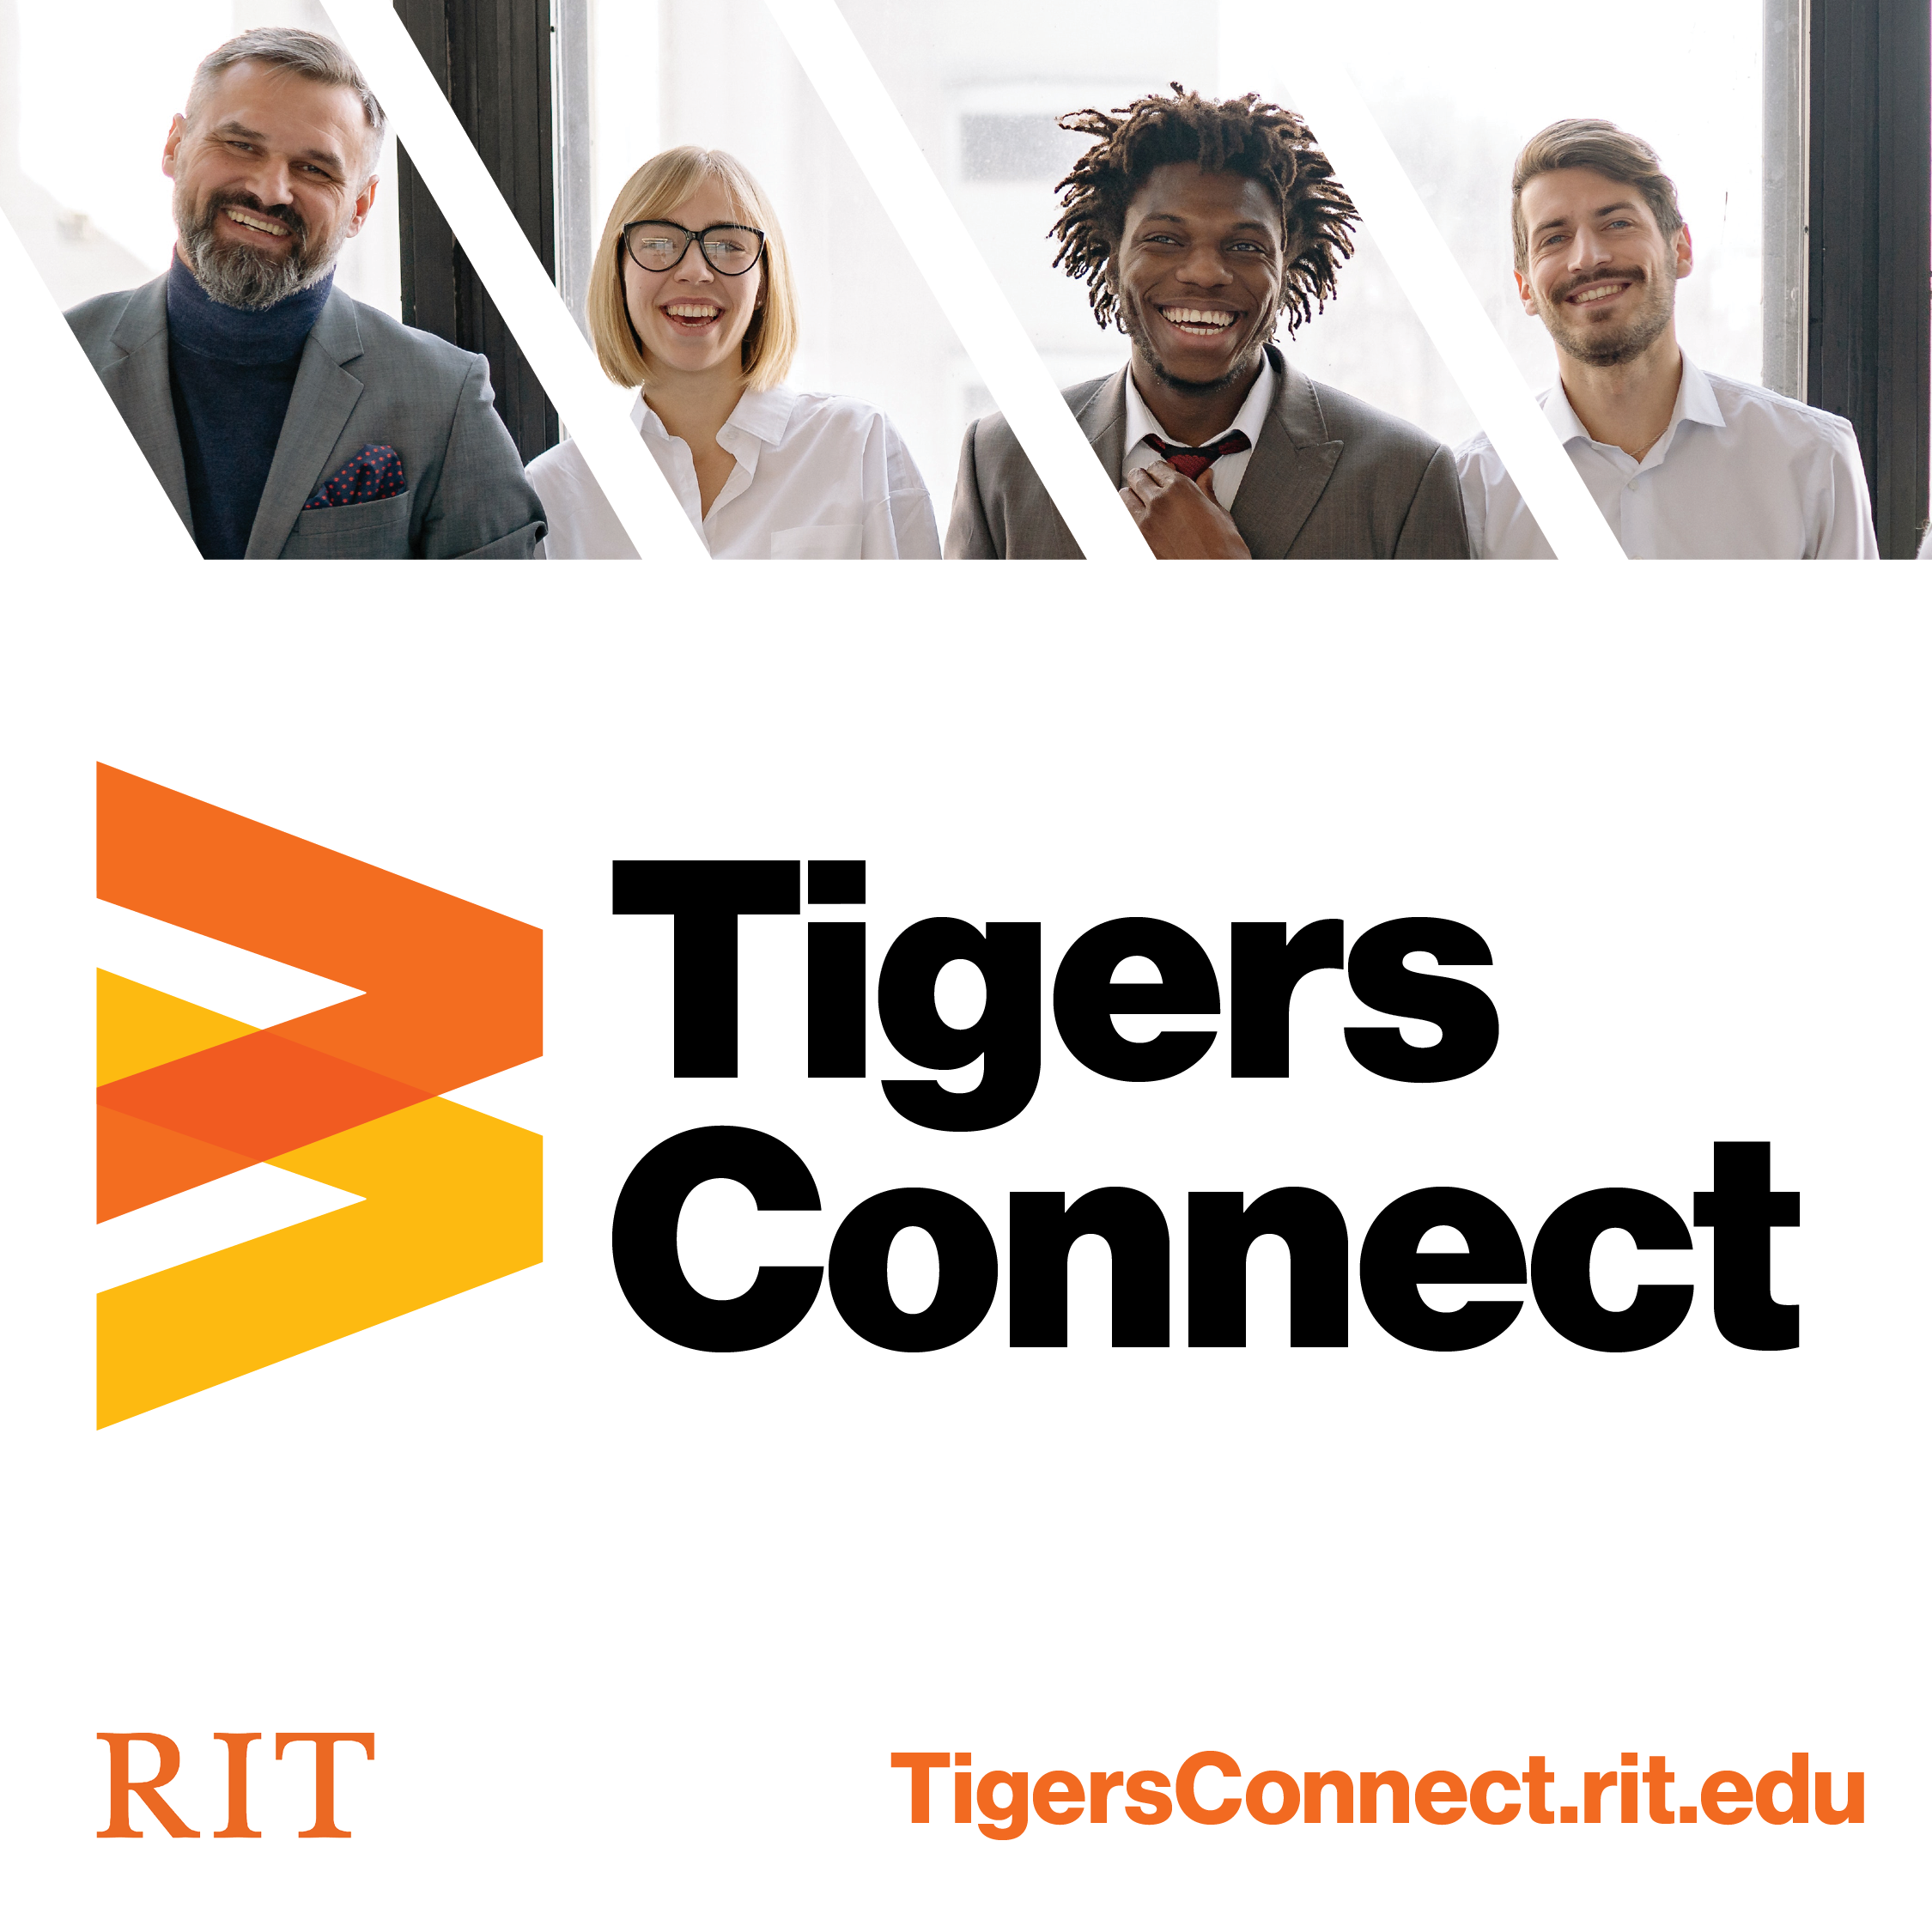 Tigers connect